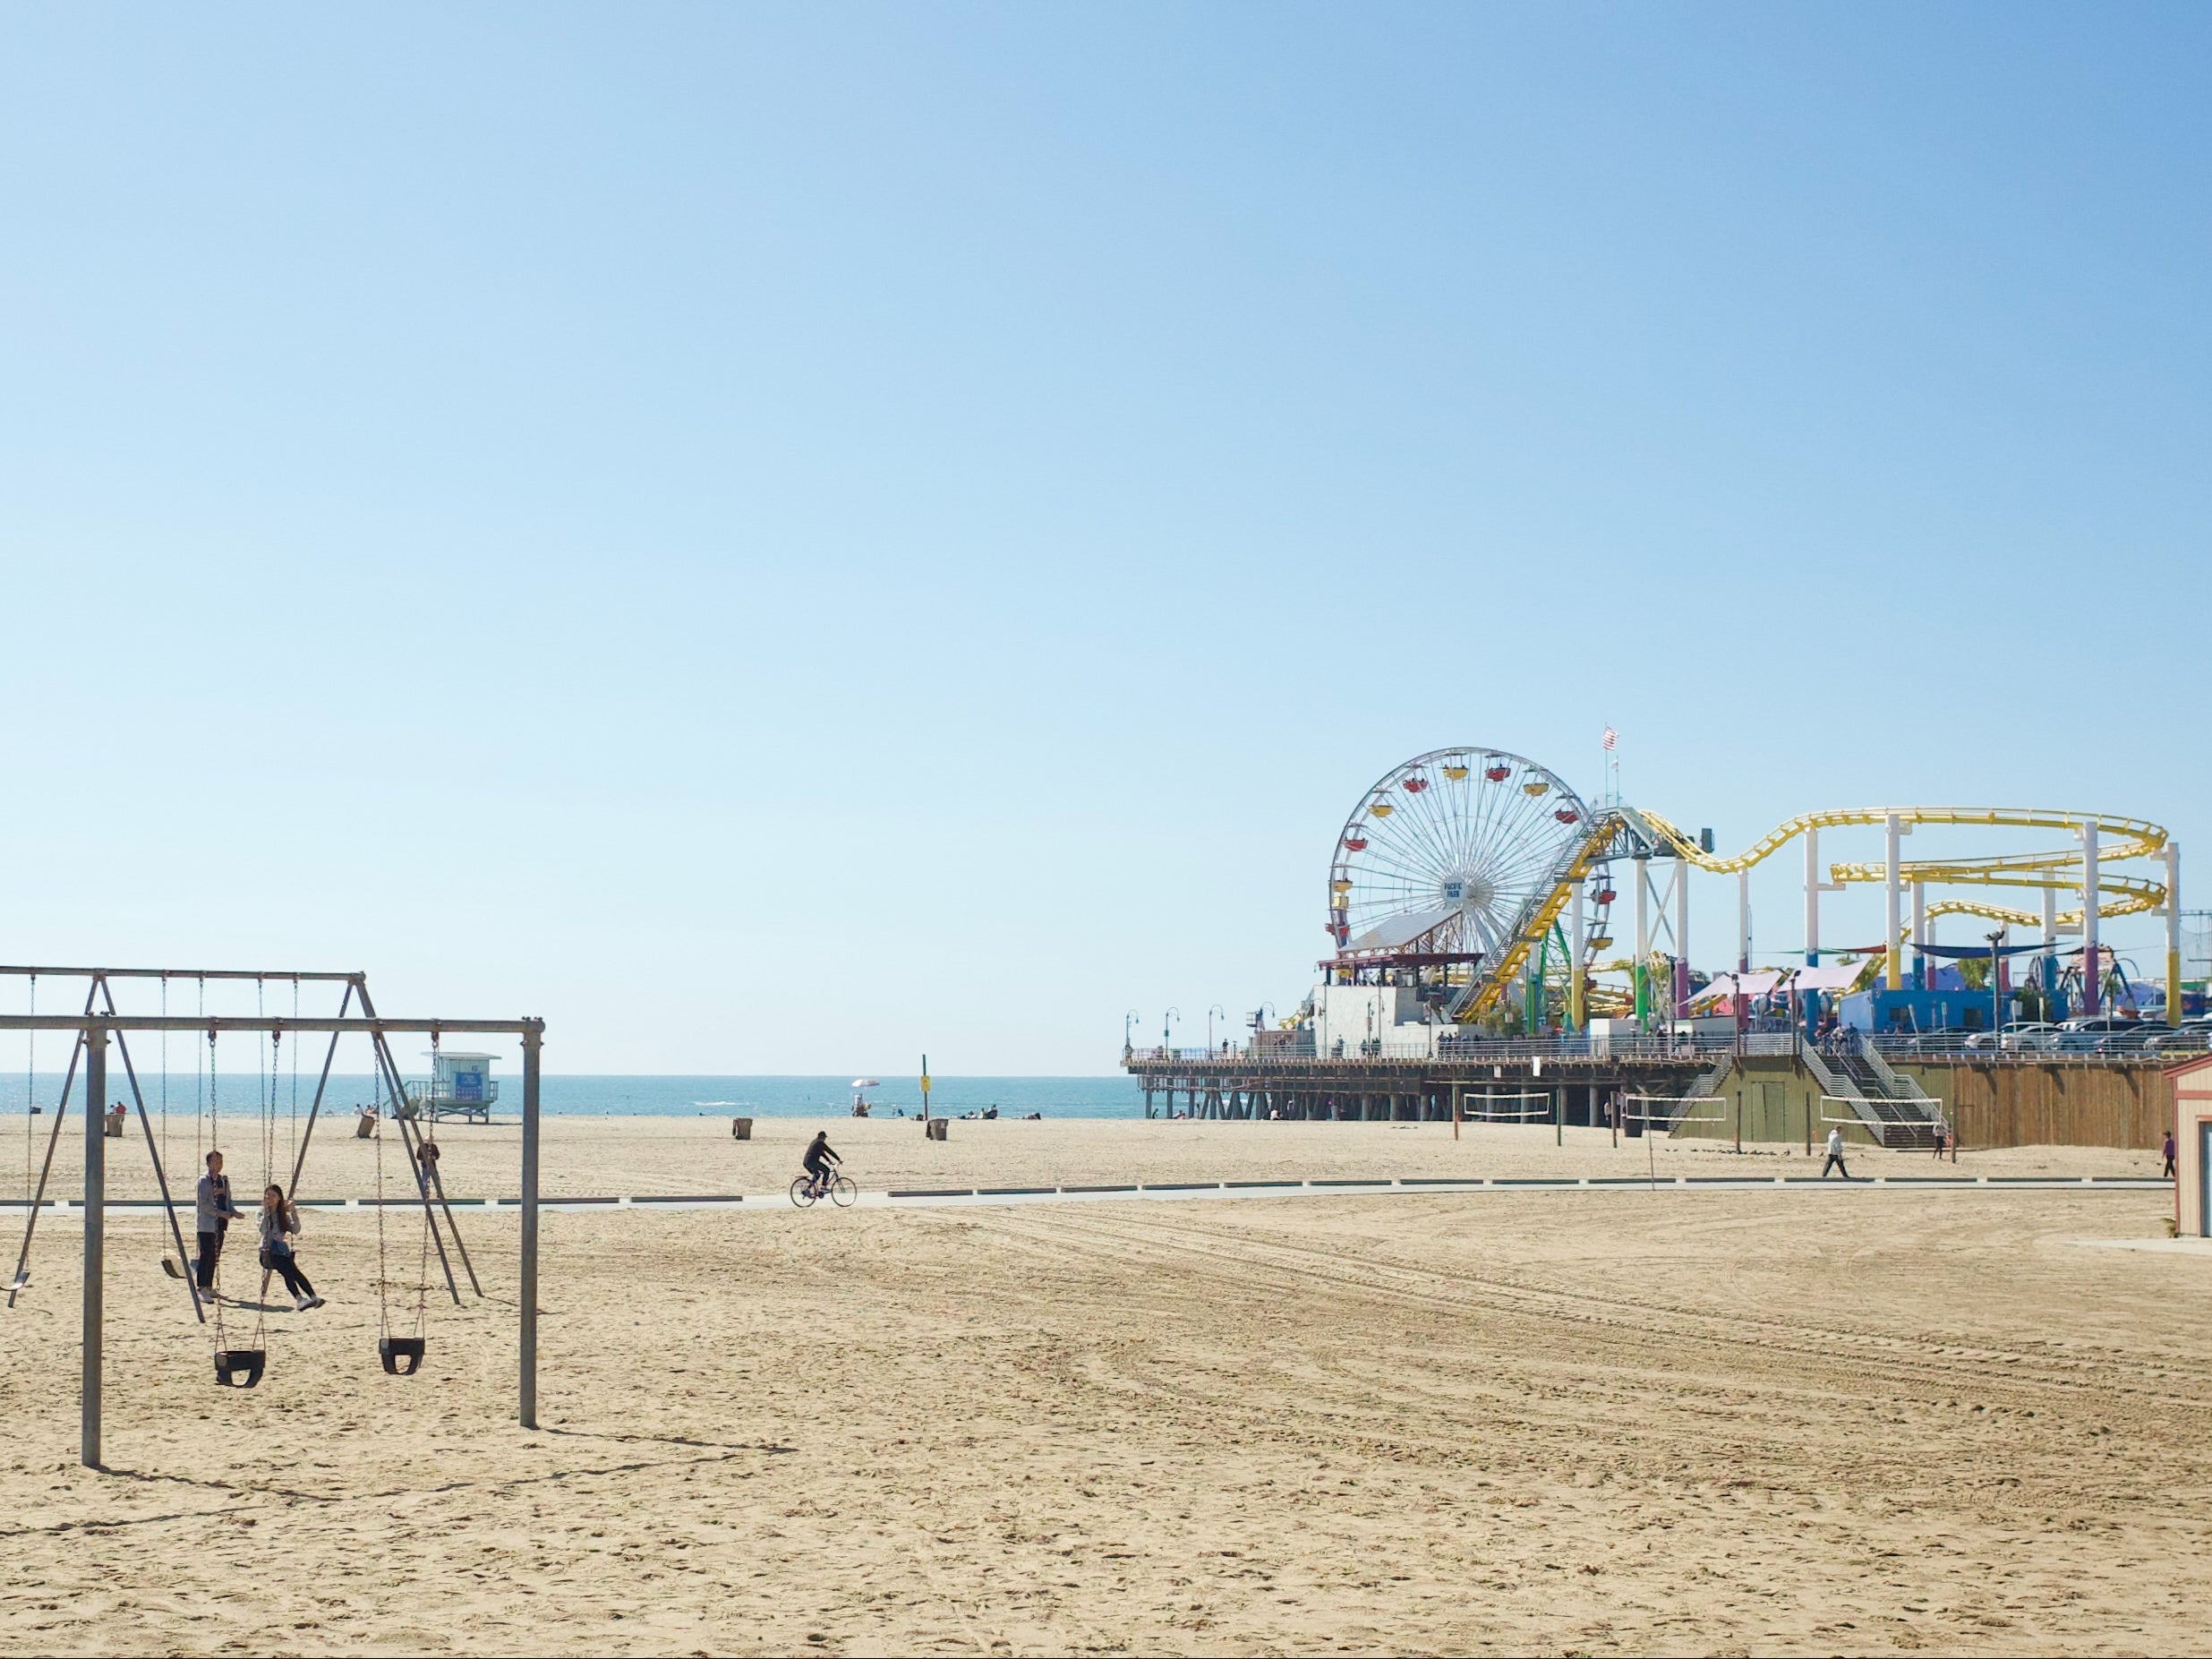 Santa Monica beach is a relaxed place to ride, before the path rejoins the road